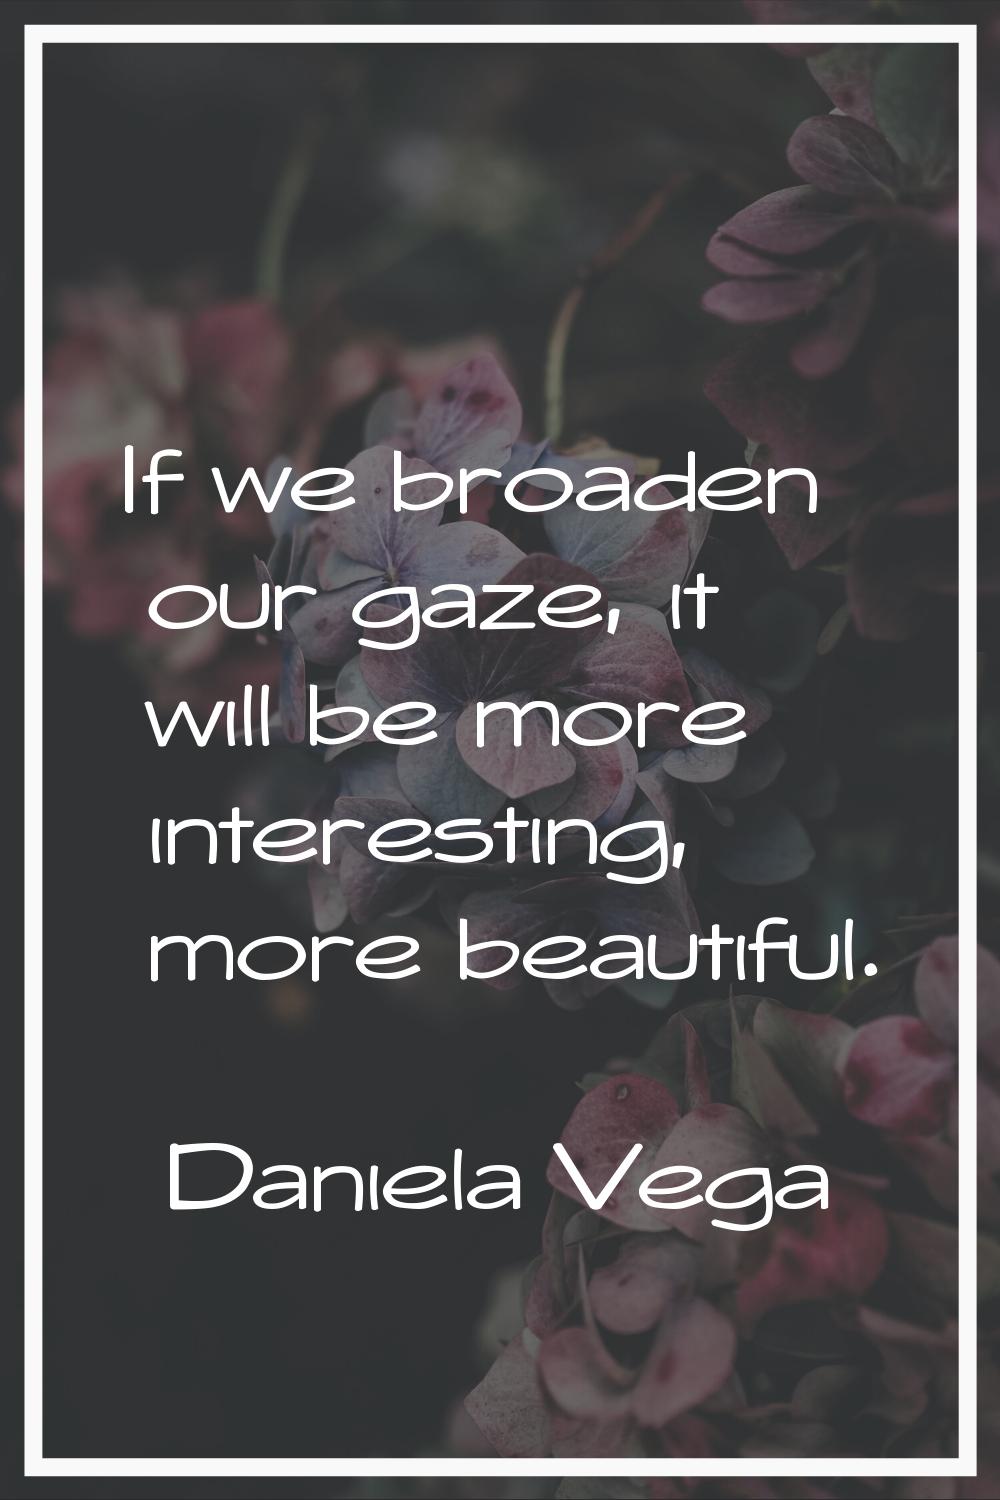 If we broaden our gaze, it will be more interesting, more beautiful.